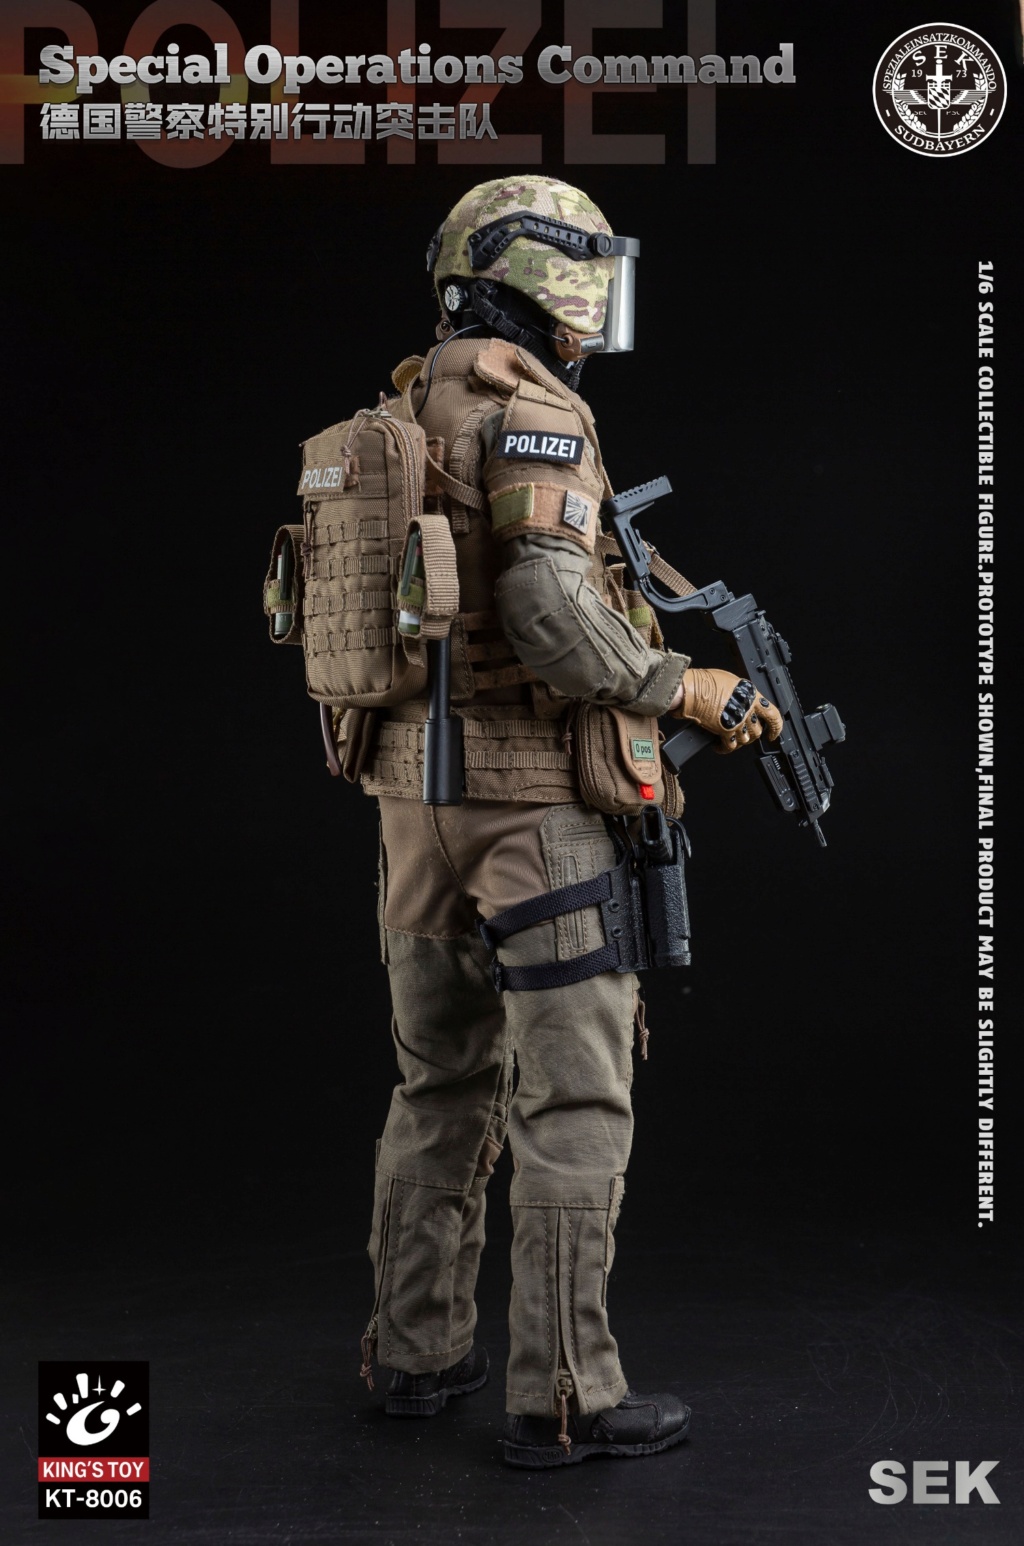 Command - NEW PRODUCT: King's Toy #KT-8006 1/6 Scale Special Operations Command SEK 09241111